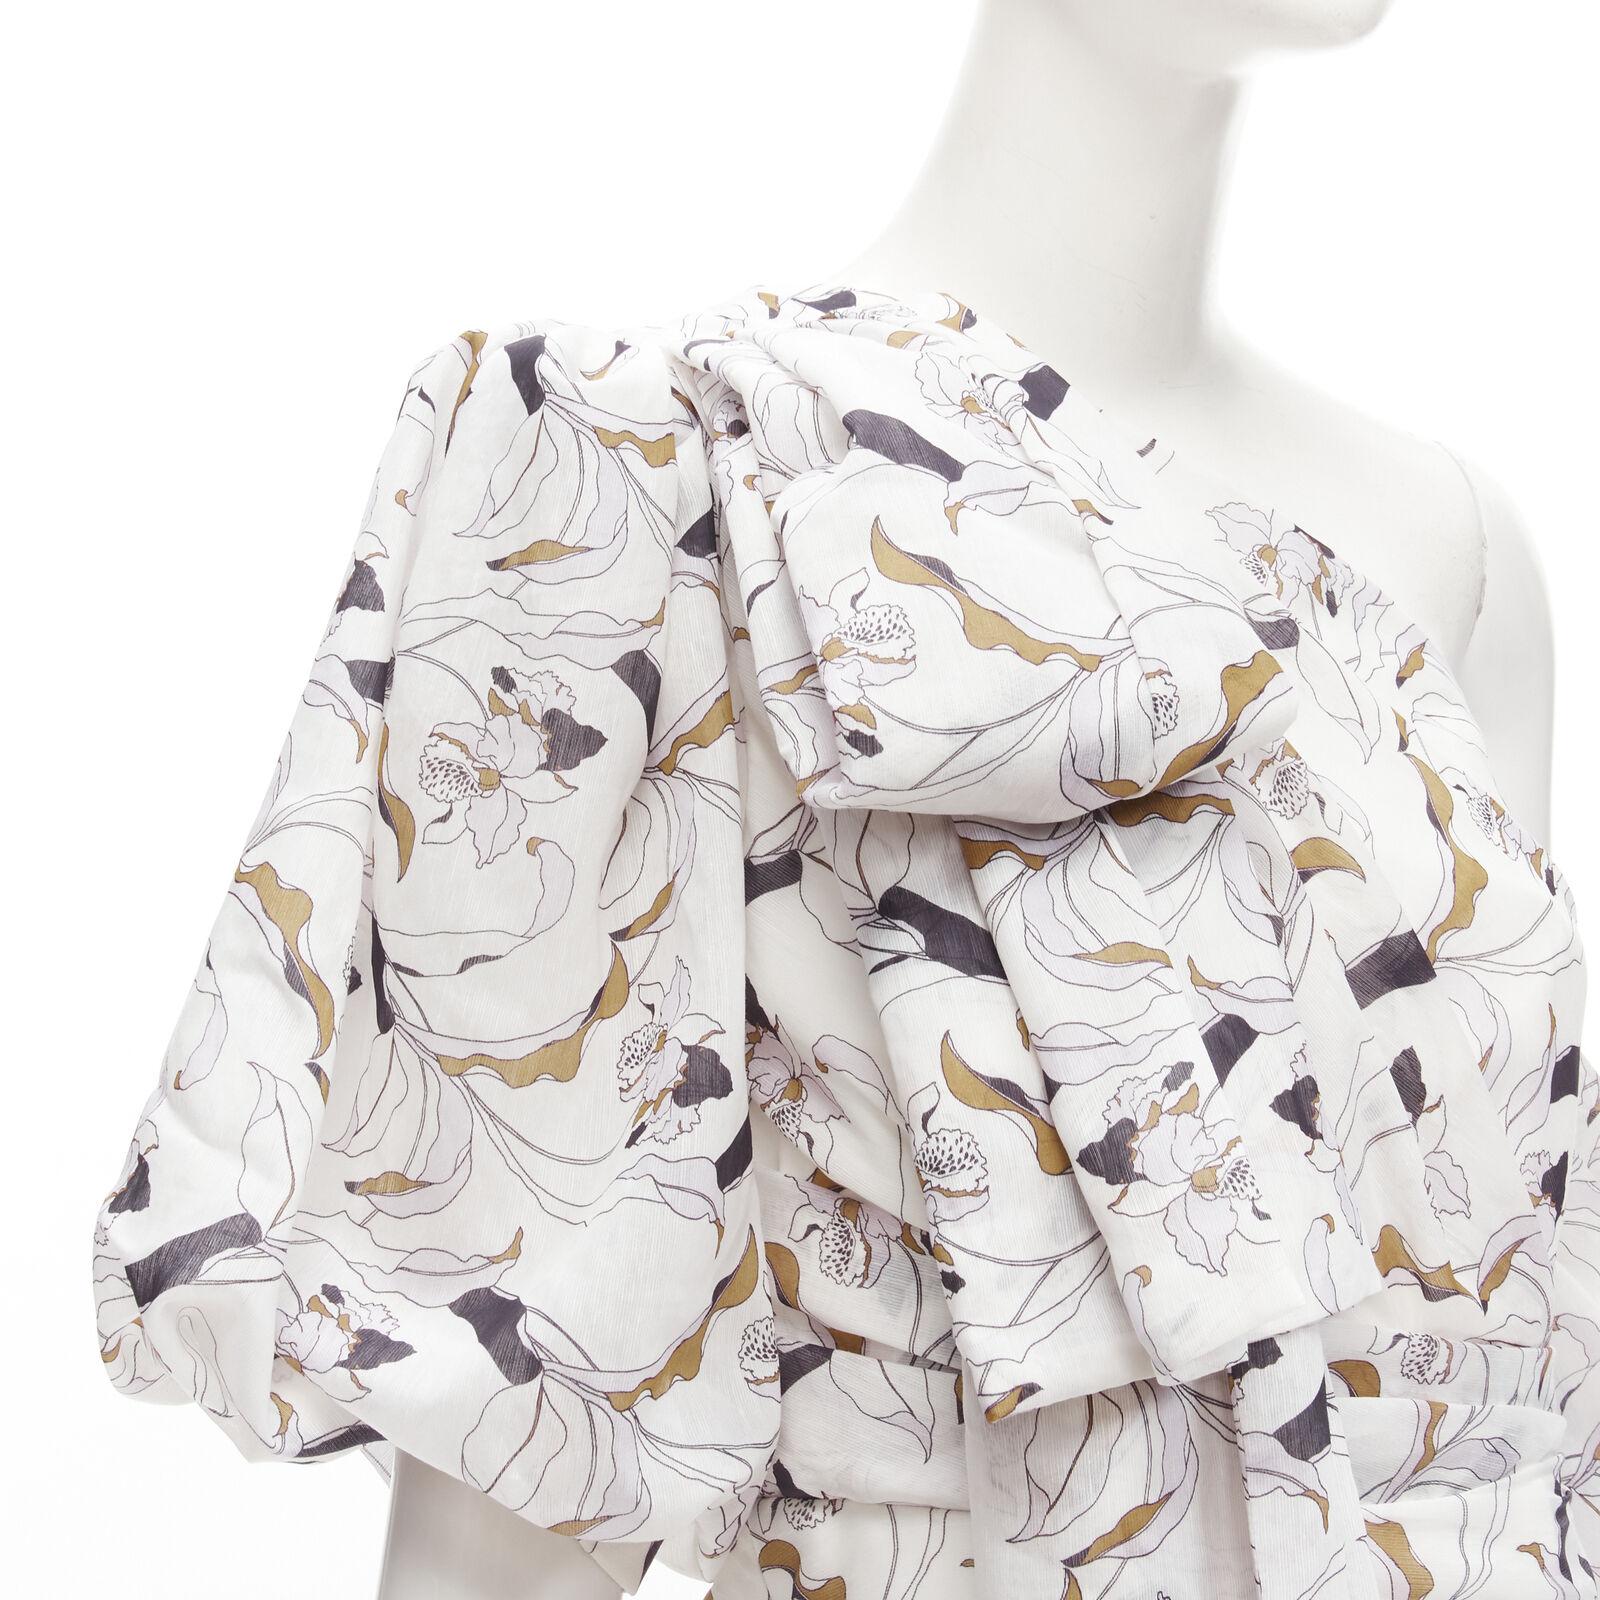 ACLER Maves white floral print bow off shoulder puff sleeve dress US2 XS
Reference: AAWC/A00147
Brand: Acler
Model: Maves
Material: Lyocell, Linen
Color: White, Purple
Pattern: Floral
Closure: Zip
Lining: Fully Lined
Extra Details: Decorative draped